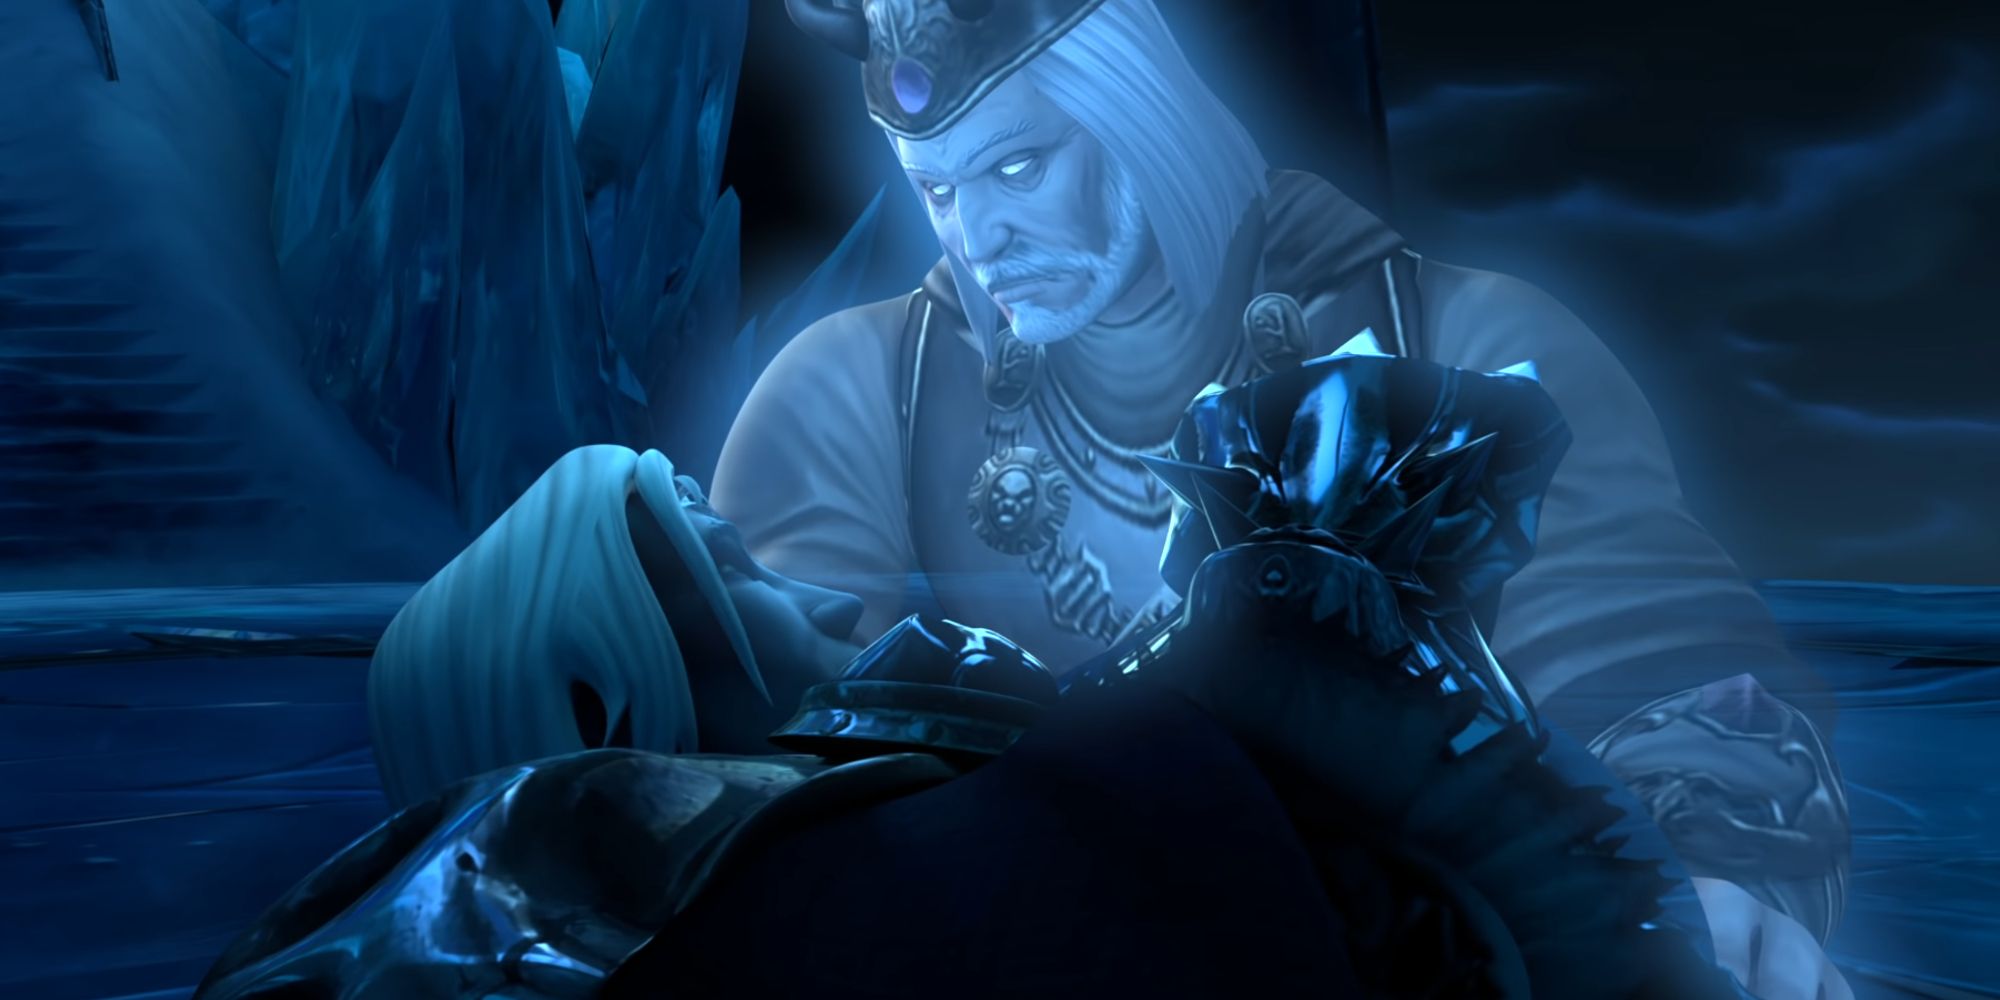 Arthas is comforted by his father King Terenas Menethil as he dies in World of Warcraft